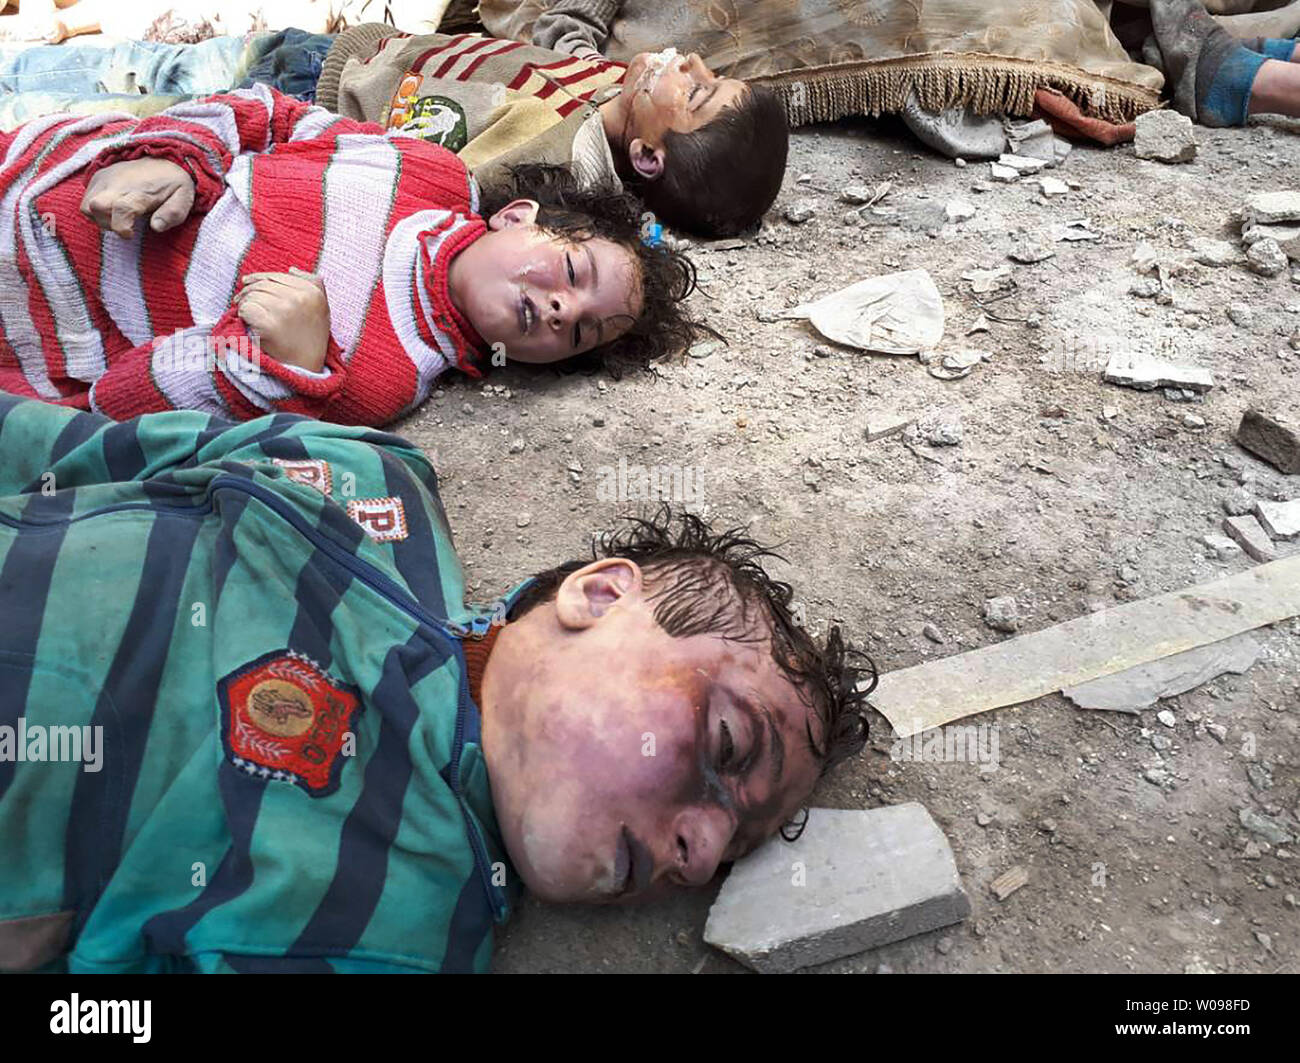 *** EDITORS NOTE CONTENT*** Dead bodies of children are seen after an alleged chemical attack on the rebel-held town of Douma in Syria. At least 78 civilians, including women and children, died according to the initial findings.   Photo by Mohammed Hassan/UPI Stock Photo